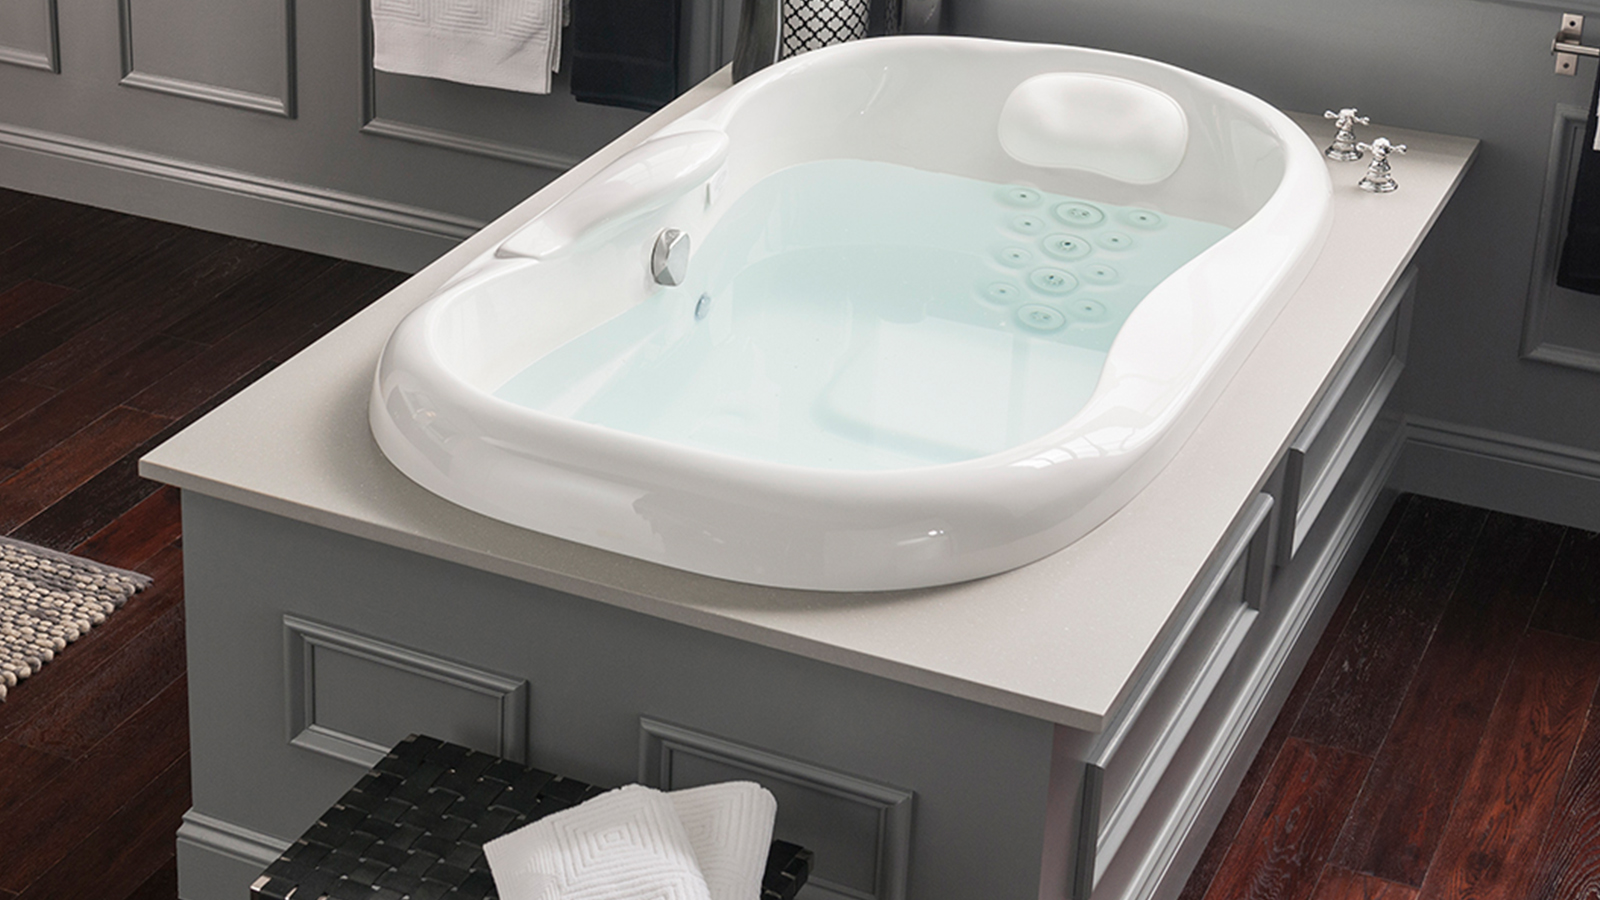 Image of a tub with a whirlpool jet system skirted in the middle of the floor.